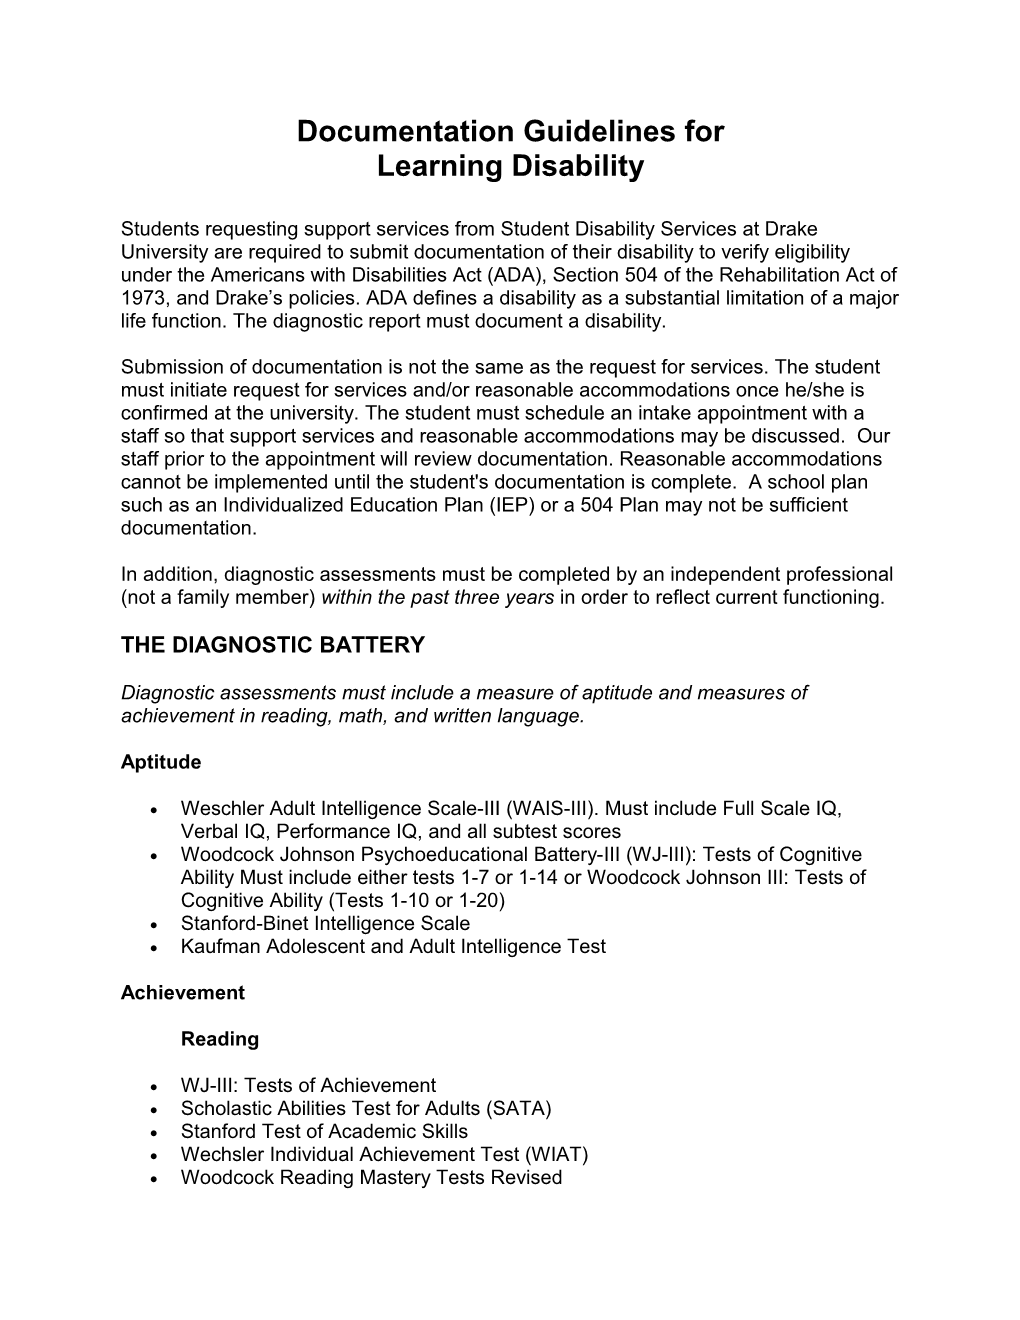 Required Documentation for a Learning Disability